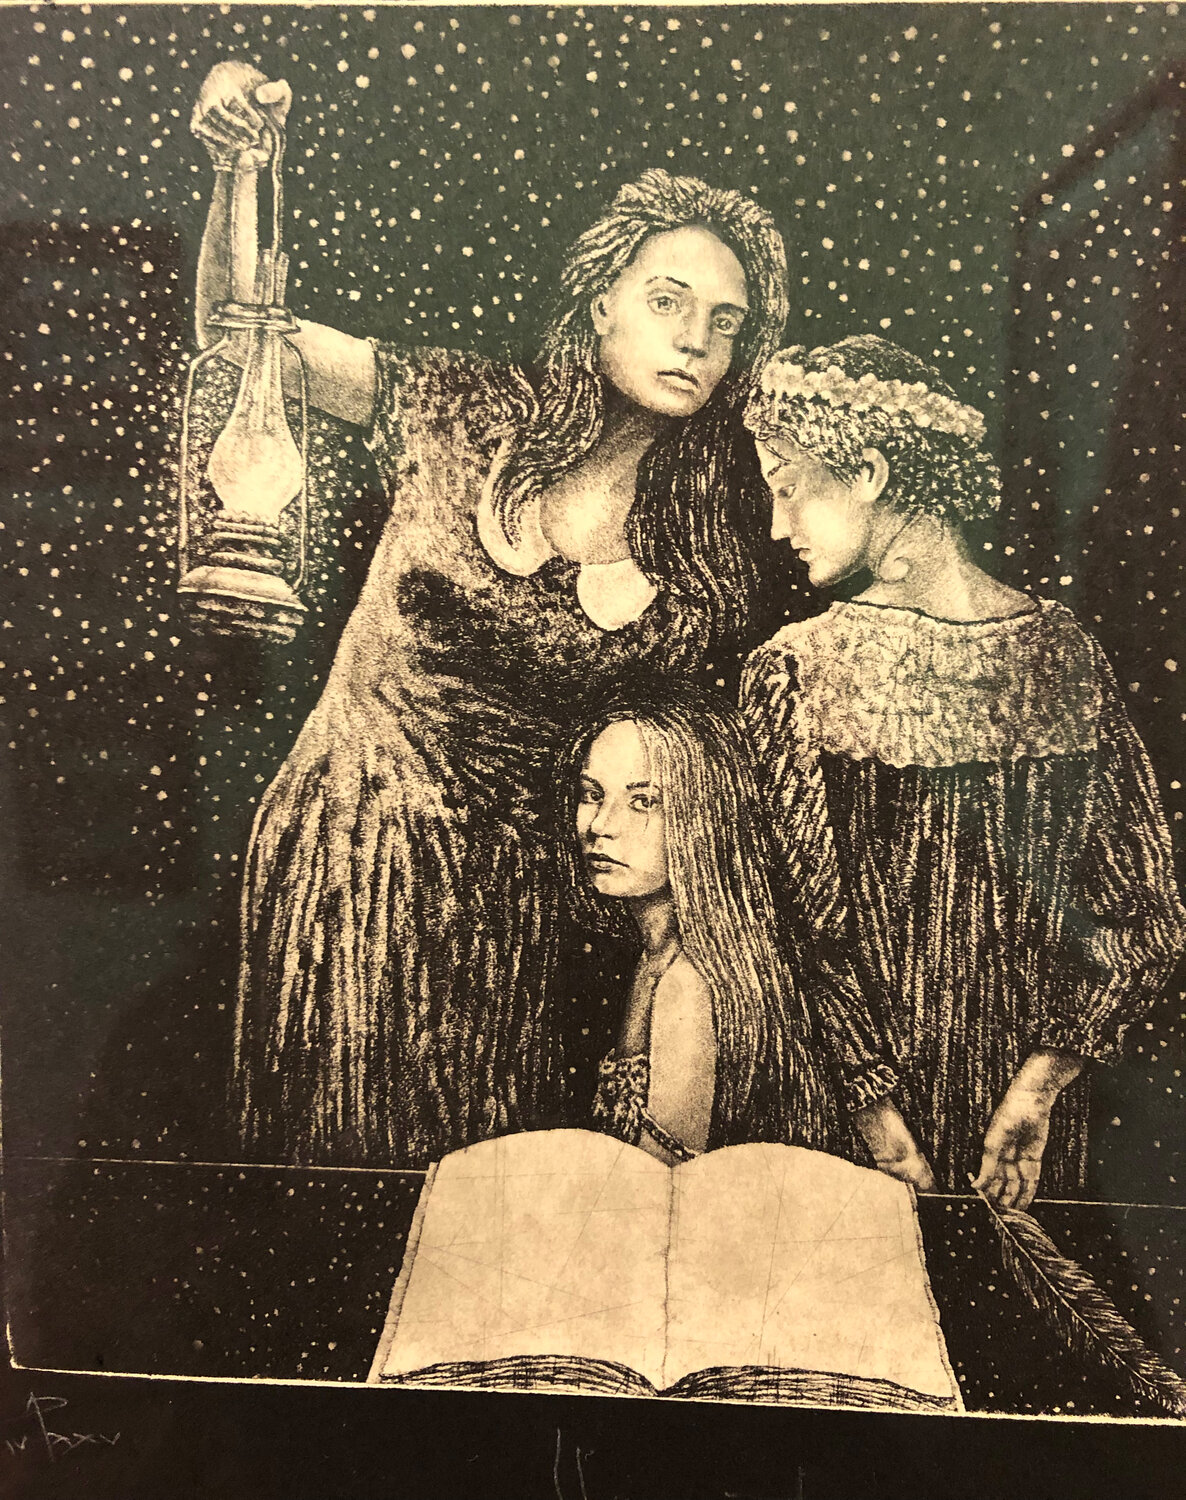 “Graces” is among the etchings by Egor Shokoladov at Northwind Art’s Jeanette Best Gallery in Port Townsend. photo courtesy of Northwind Art